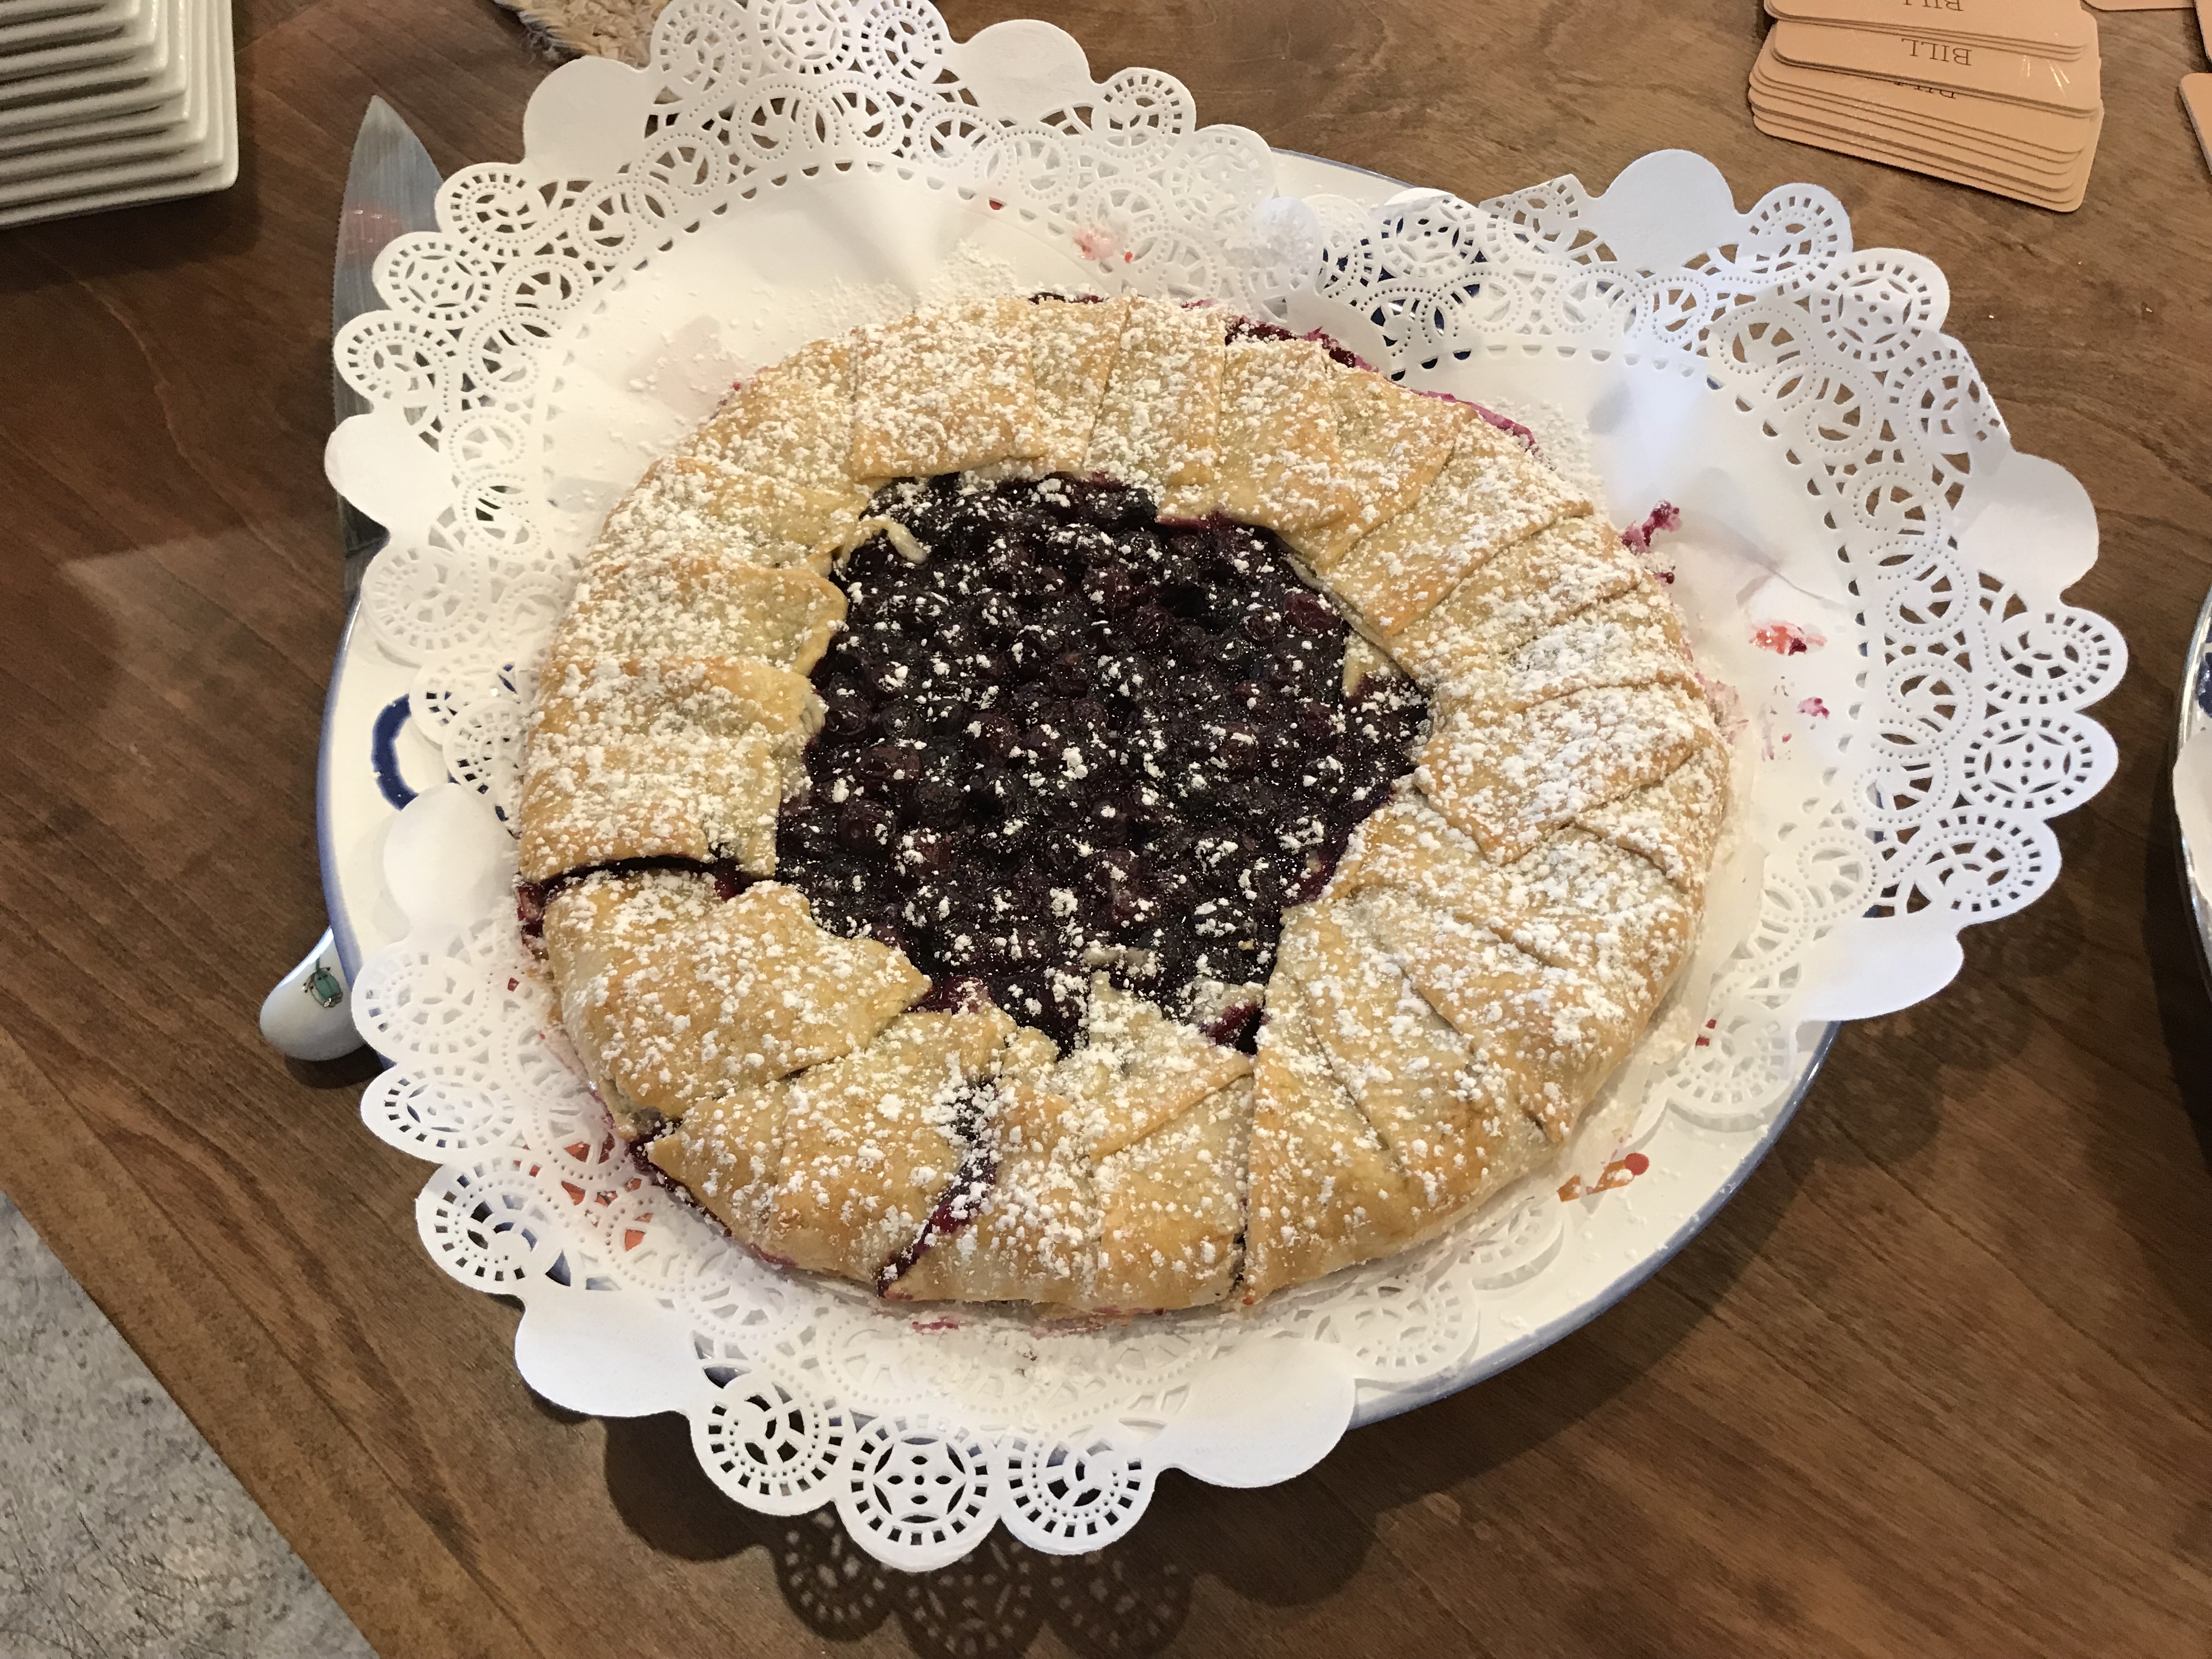 Blueberry galette with powdered sugar